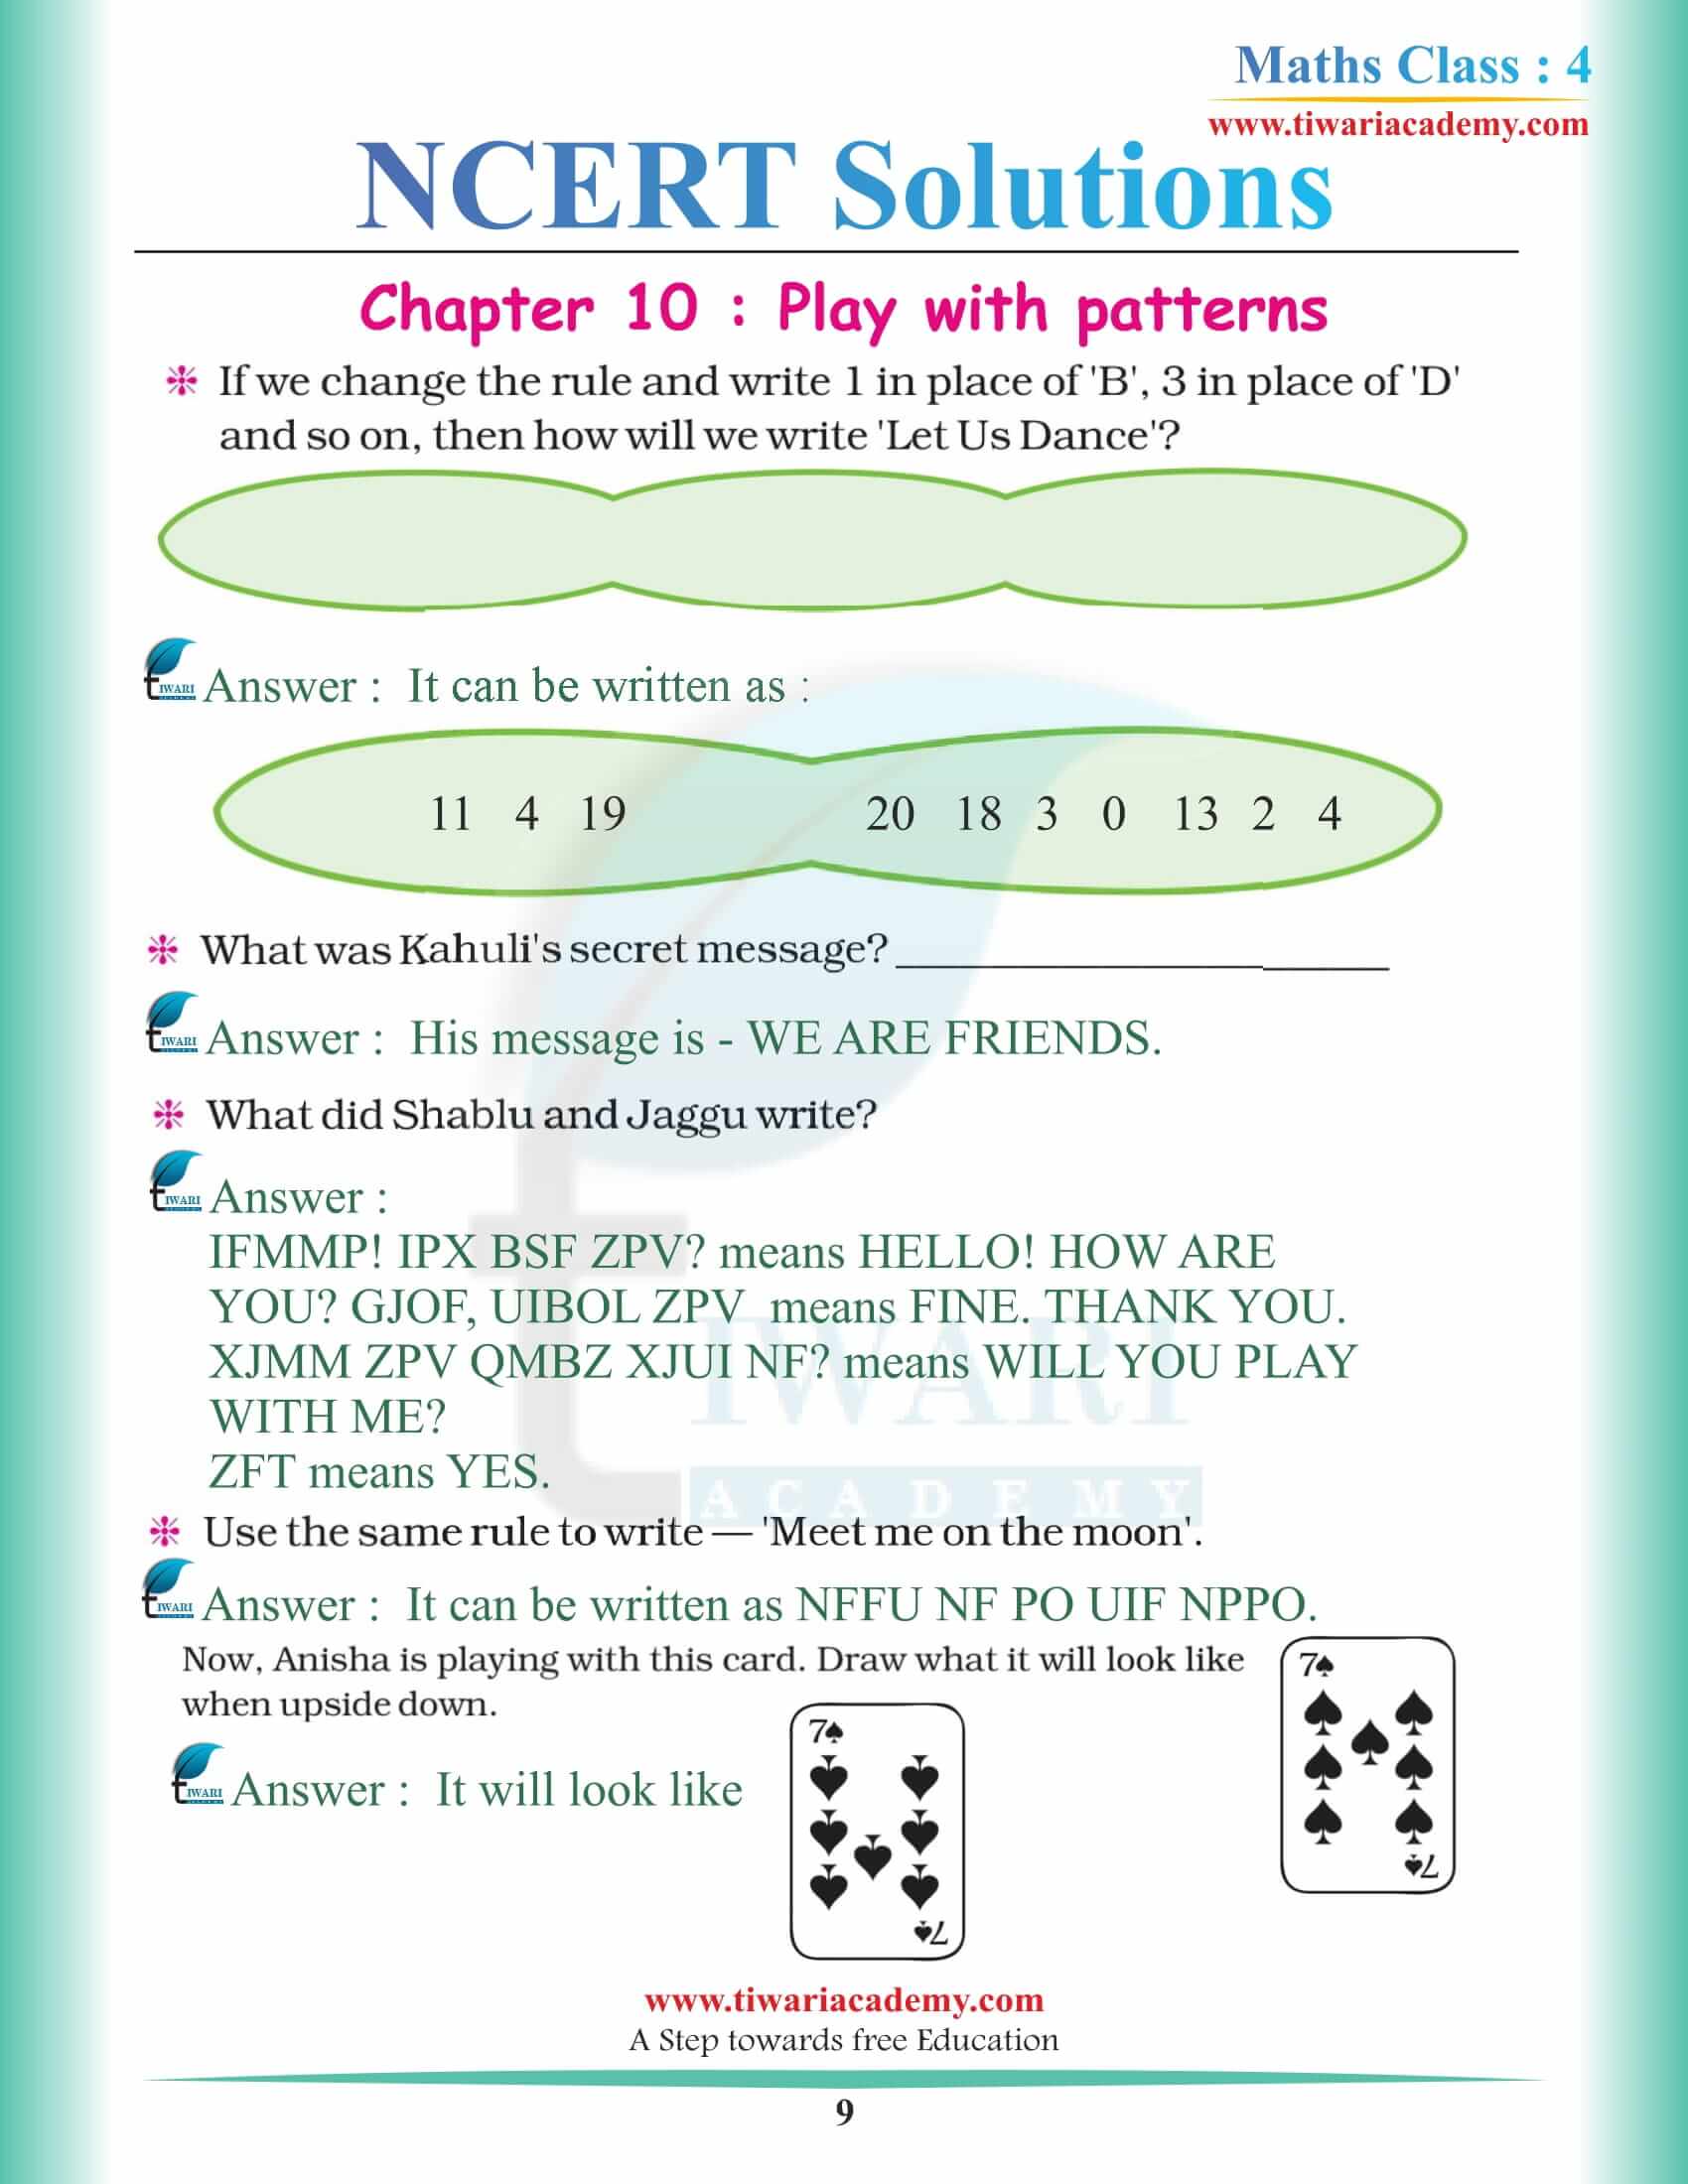 Class 4 Maths NCERT Chapter 10 Solutions in PDF